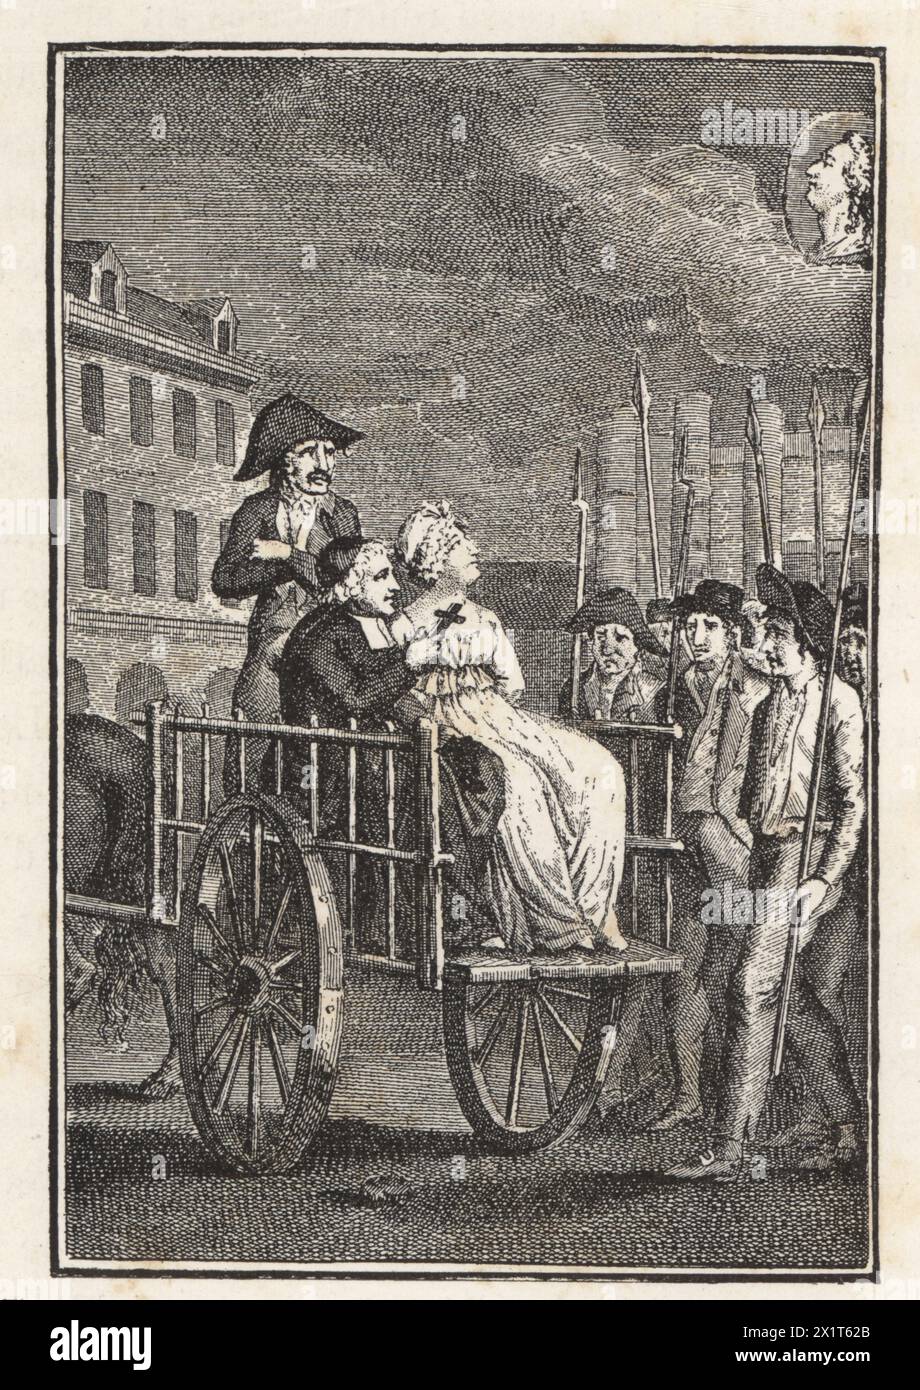 Marie-Antoinette, queen of King Louis XVI, being taken to the guillotine on a tumbril, 21 January 1793. From a frontispice to the novel by Jean-Joseph Regnault-Warin, La Cimetiere de la Madeleine, 1800. Frontispiece representant Marie-Antoinette conduite au supplice. Illustration from Paul Lacroix's Directoire, Consulat et Empire, (Directory, Consulate and Empire), Paris, 1884. Stock Photo